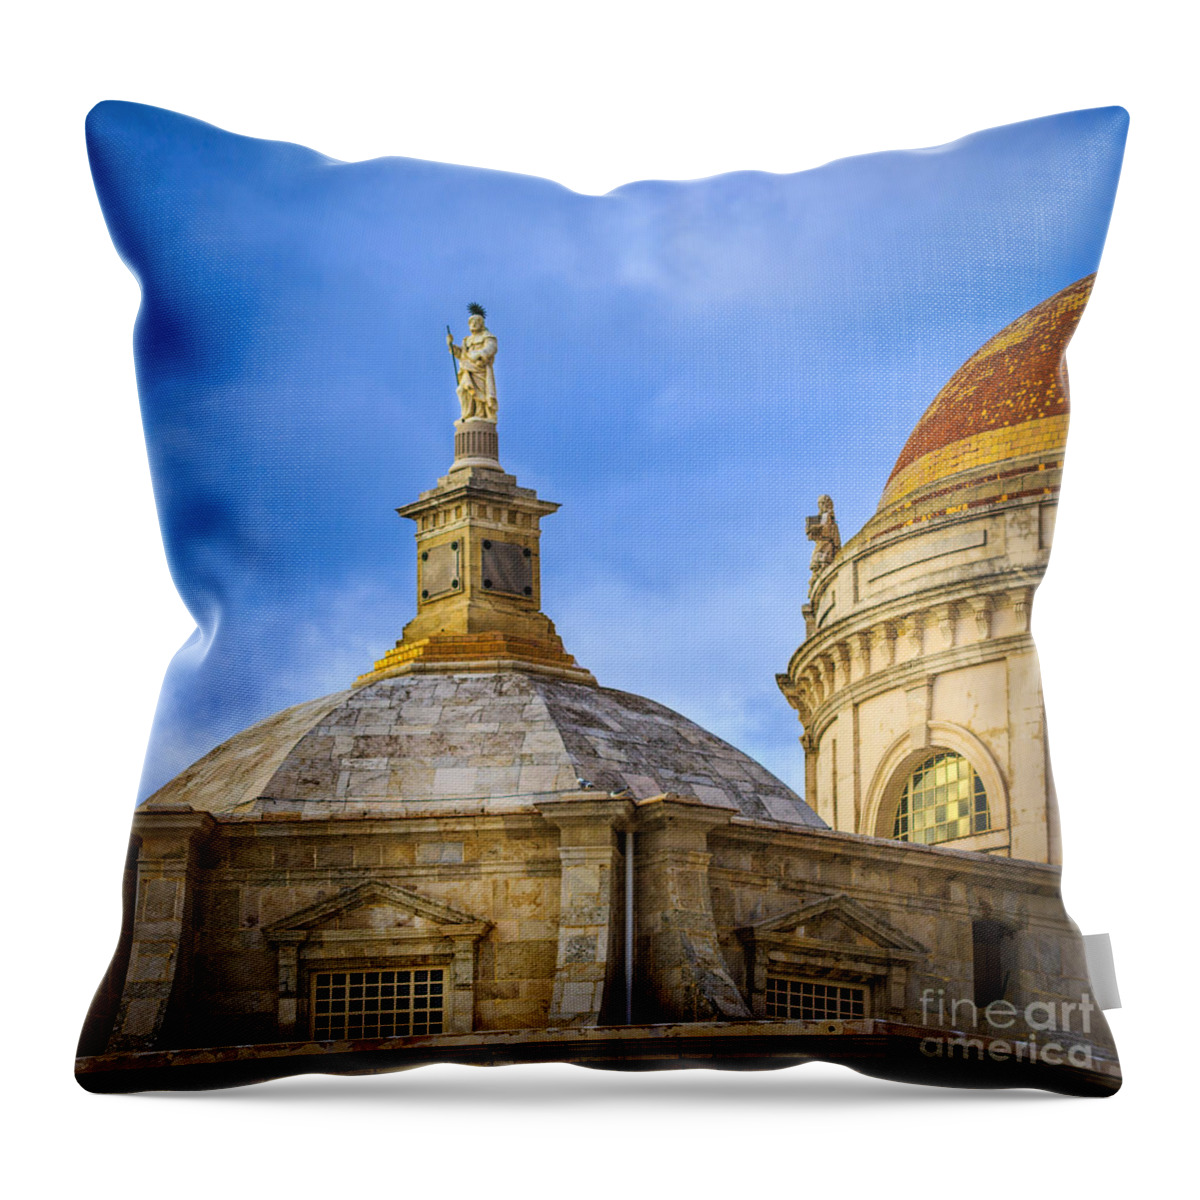 Andalucia Throw Pillow featuring the photograph Dome and Saint Cadiz Spain by Pablo Avanzini